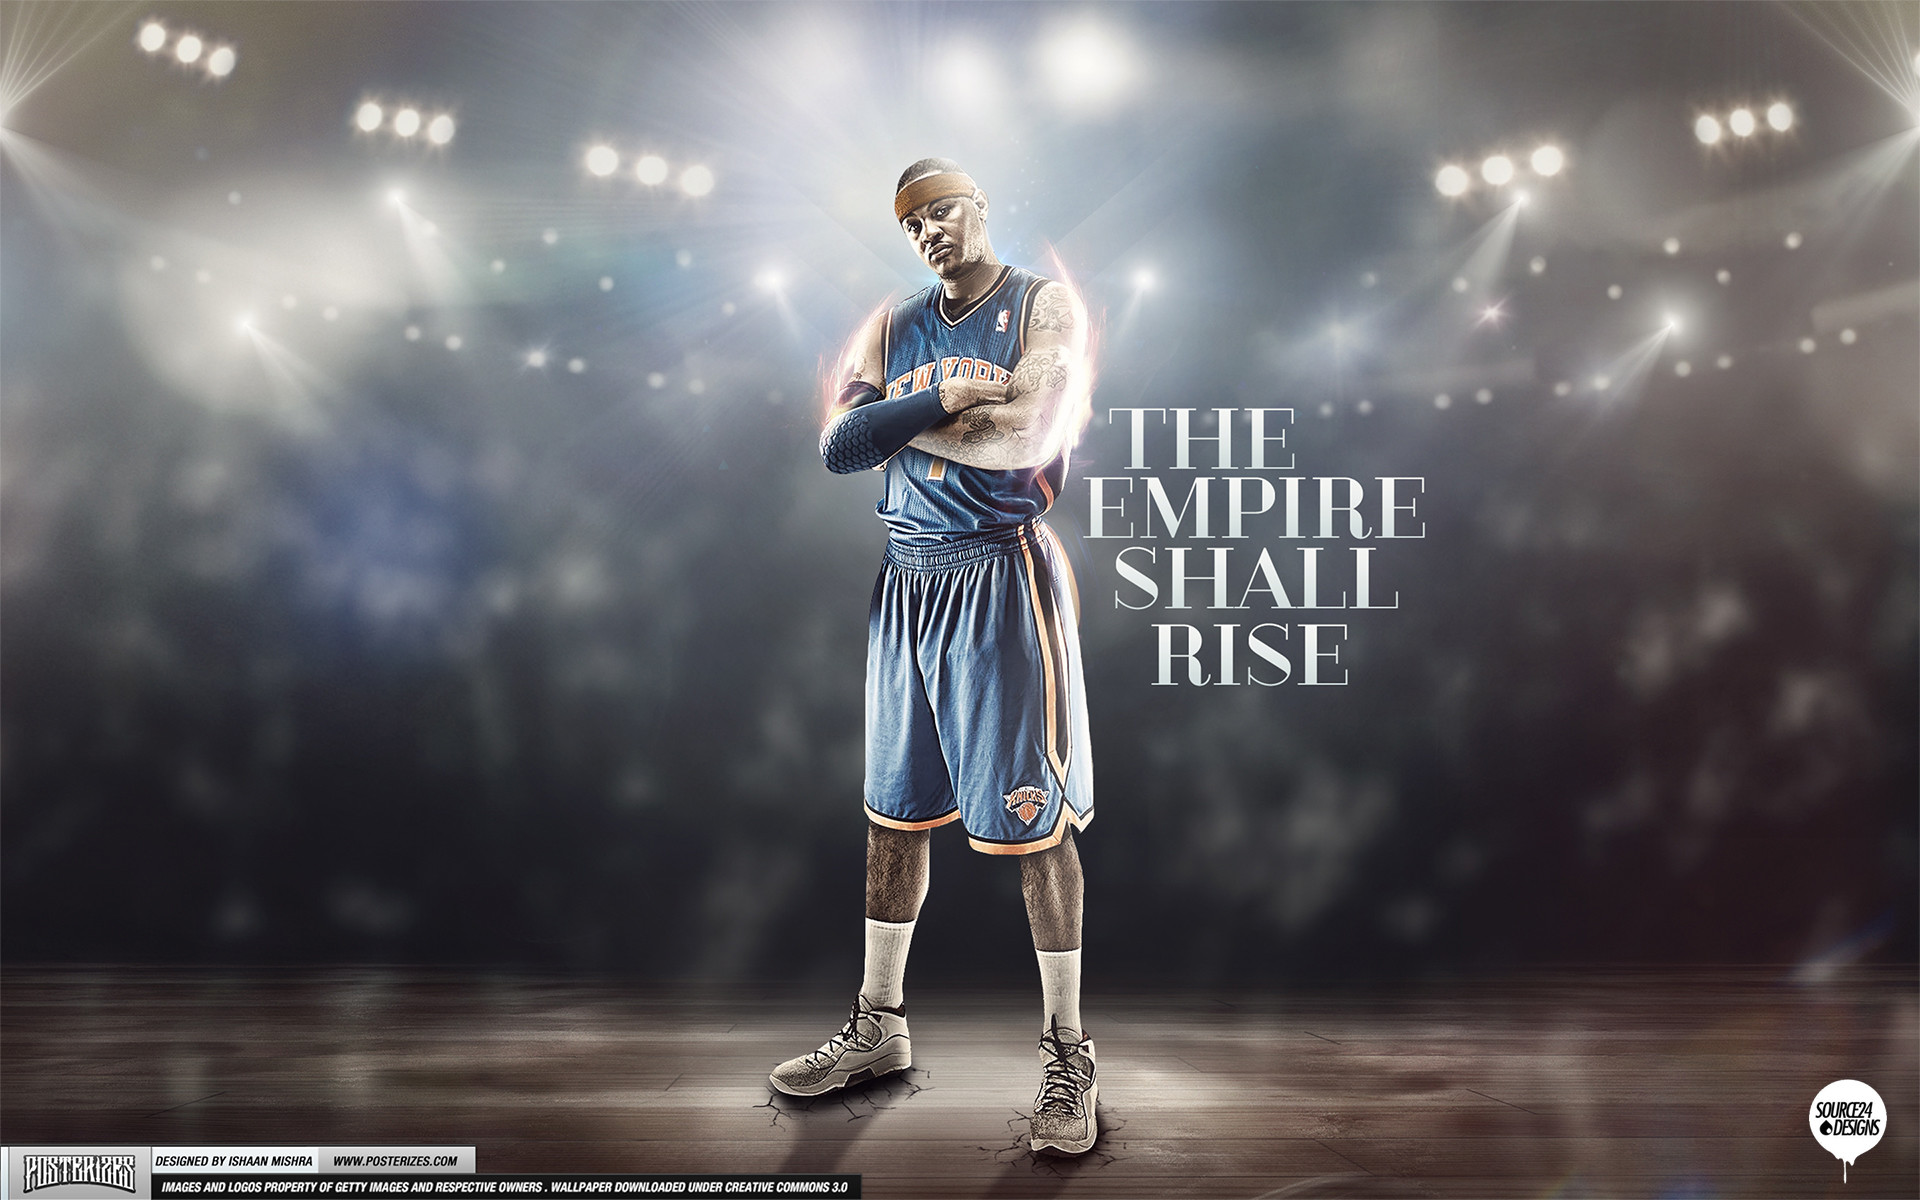 1920x1200 Carmelo Anthony Knicks Empire Wallpaper by IshaanMishra Carmelo Anthony  Knicks Empire Wallpaper by IshaanMishra